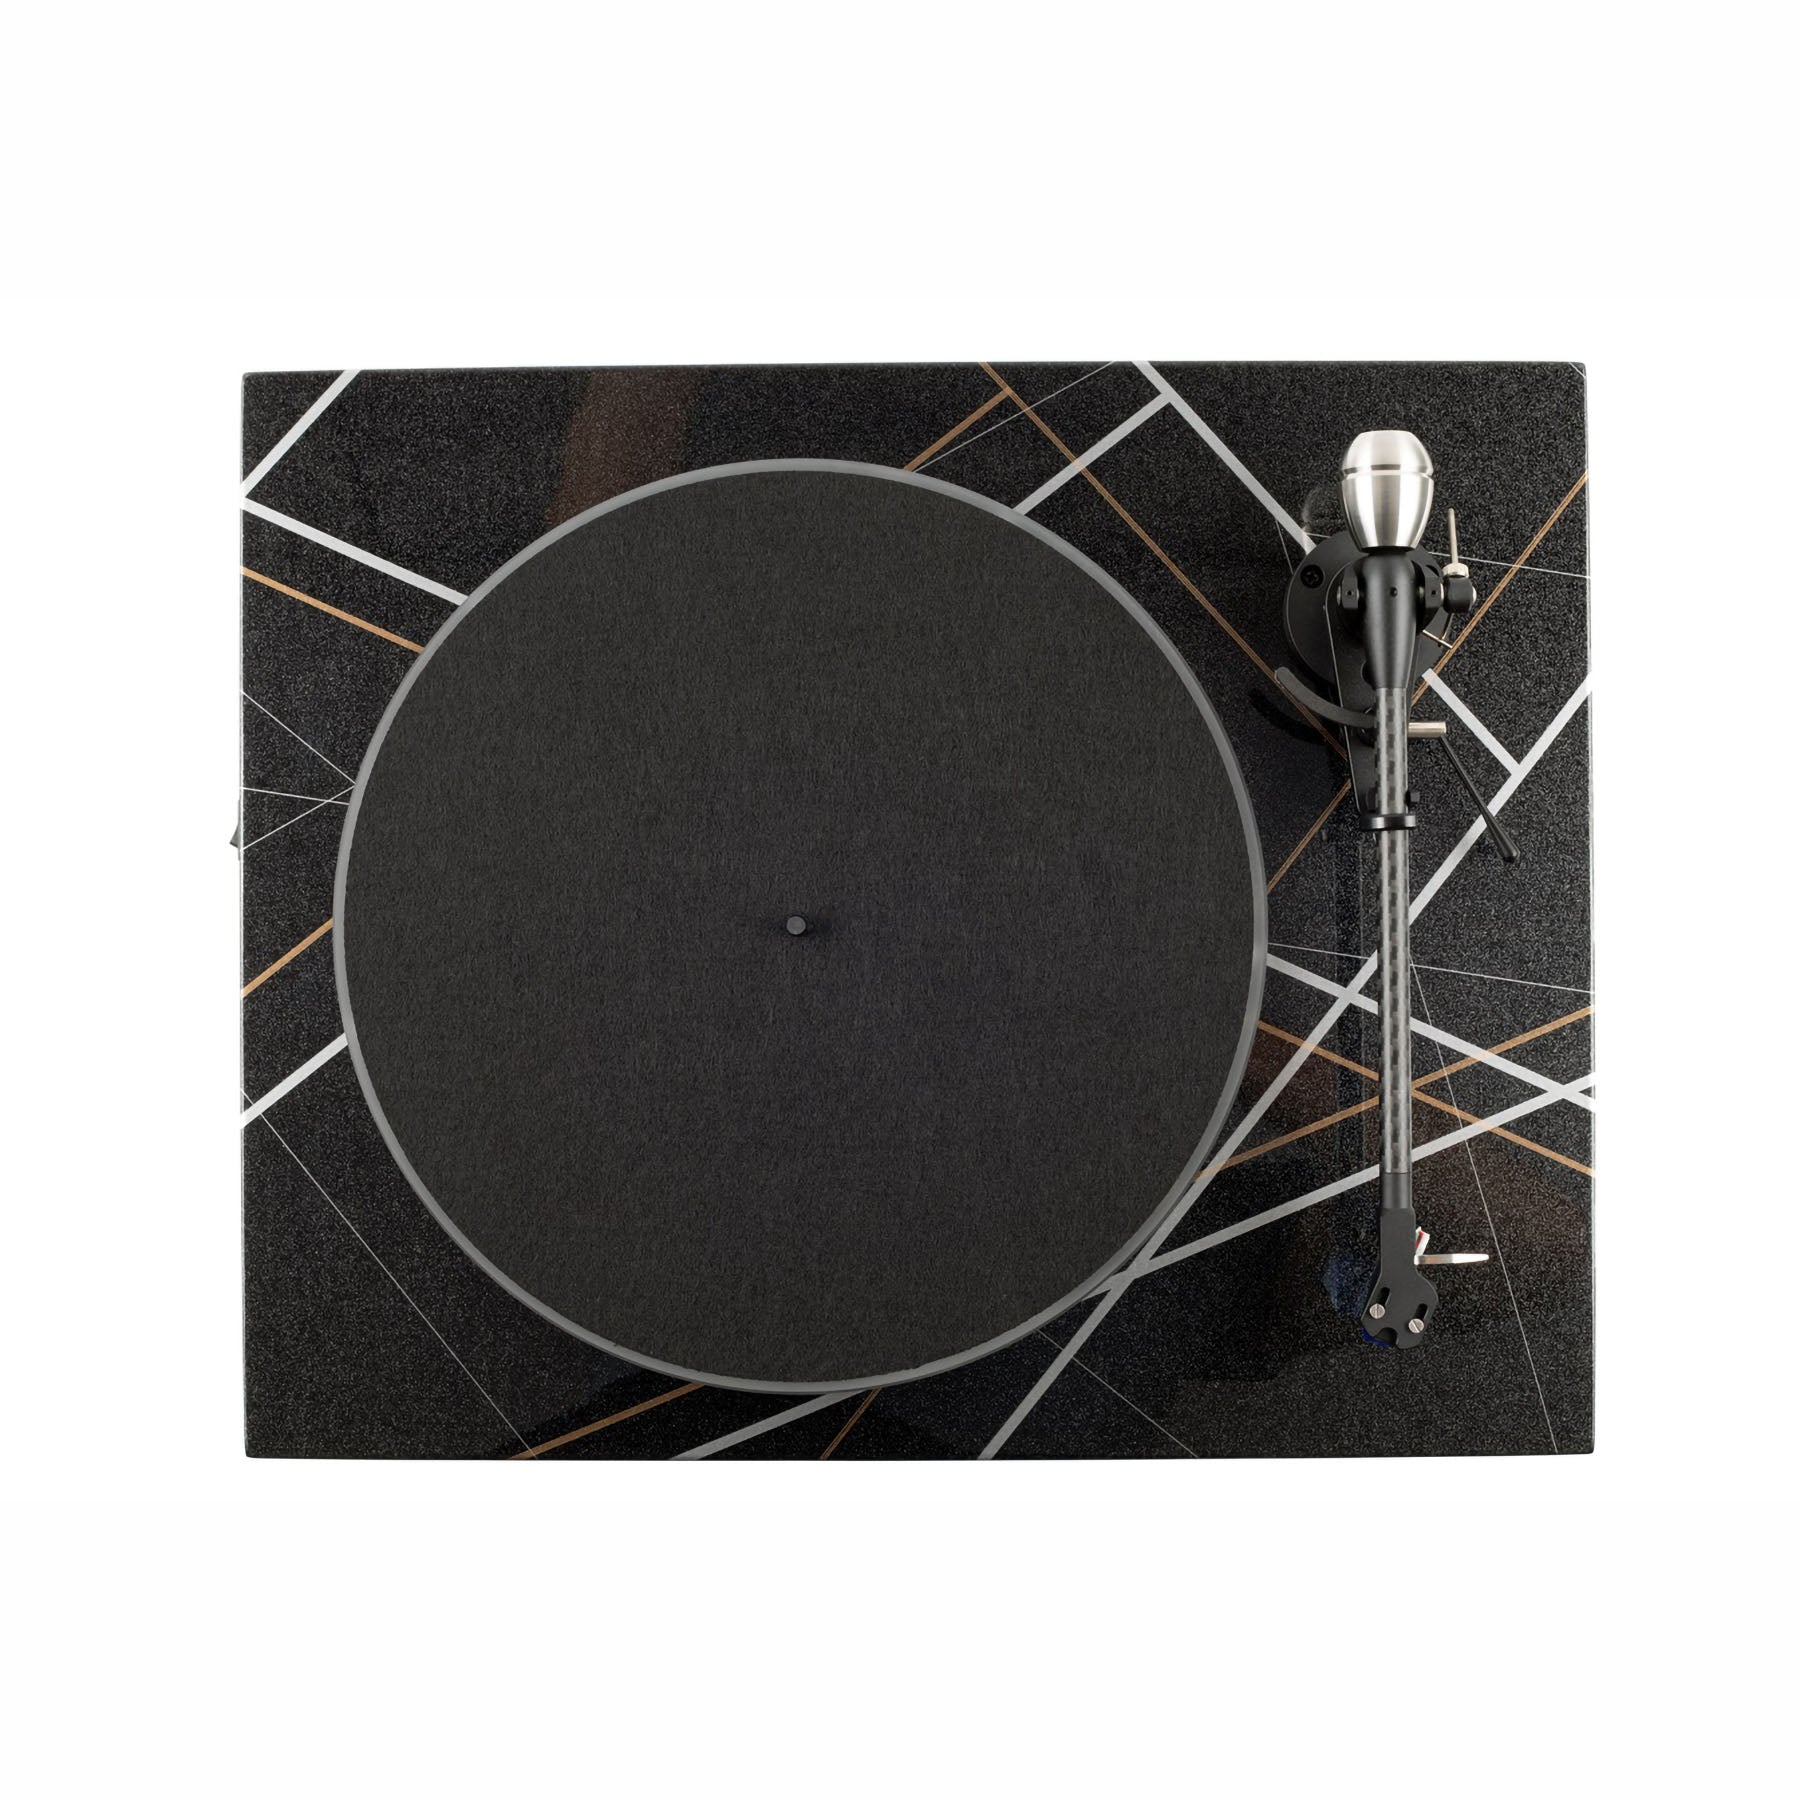 AURIS Blues Turntable with T809 Tonearm